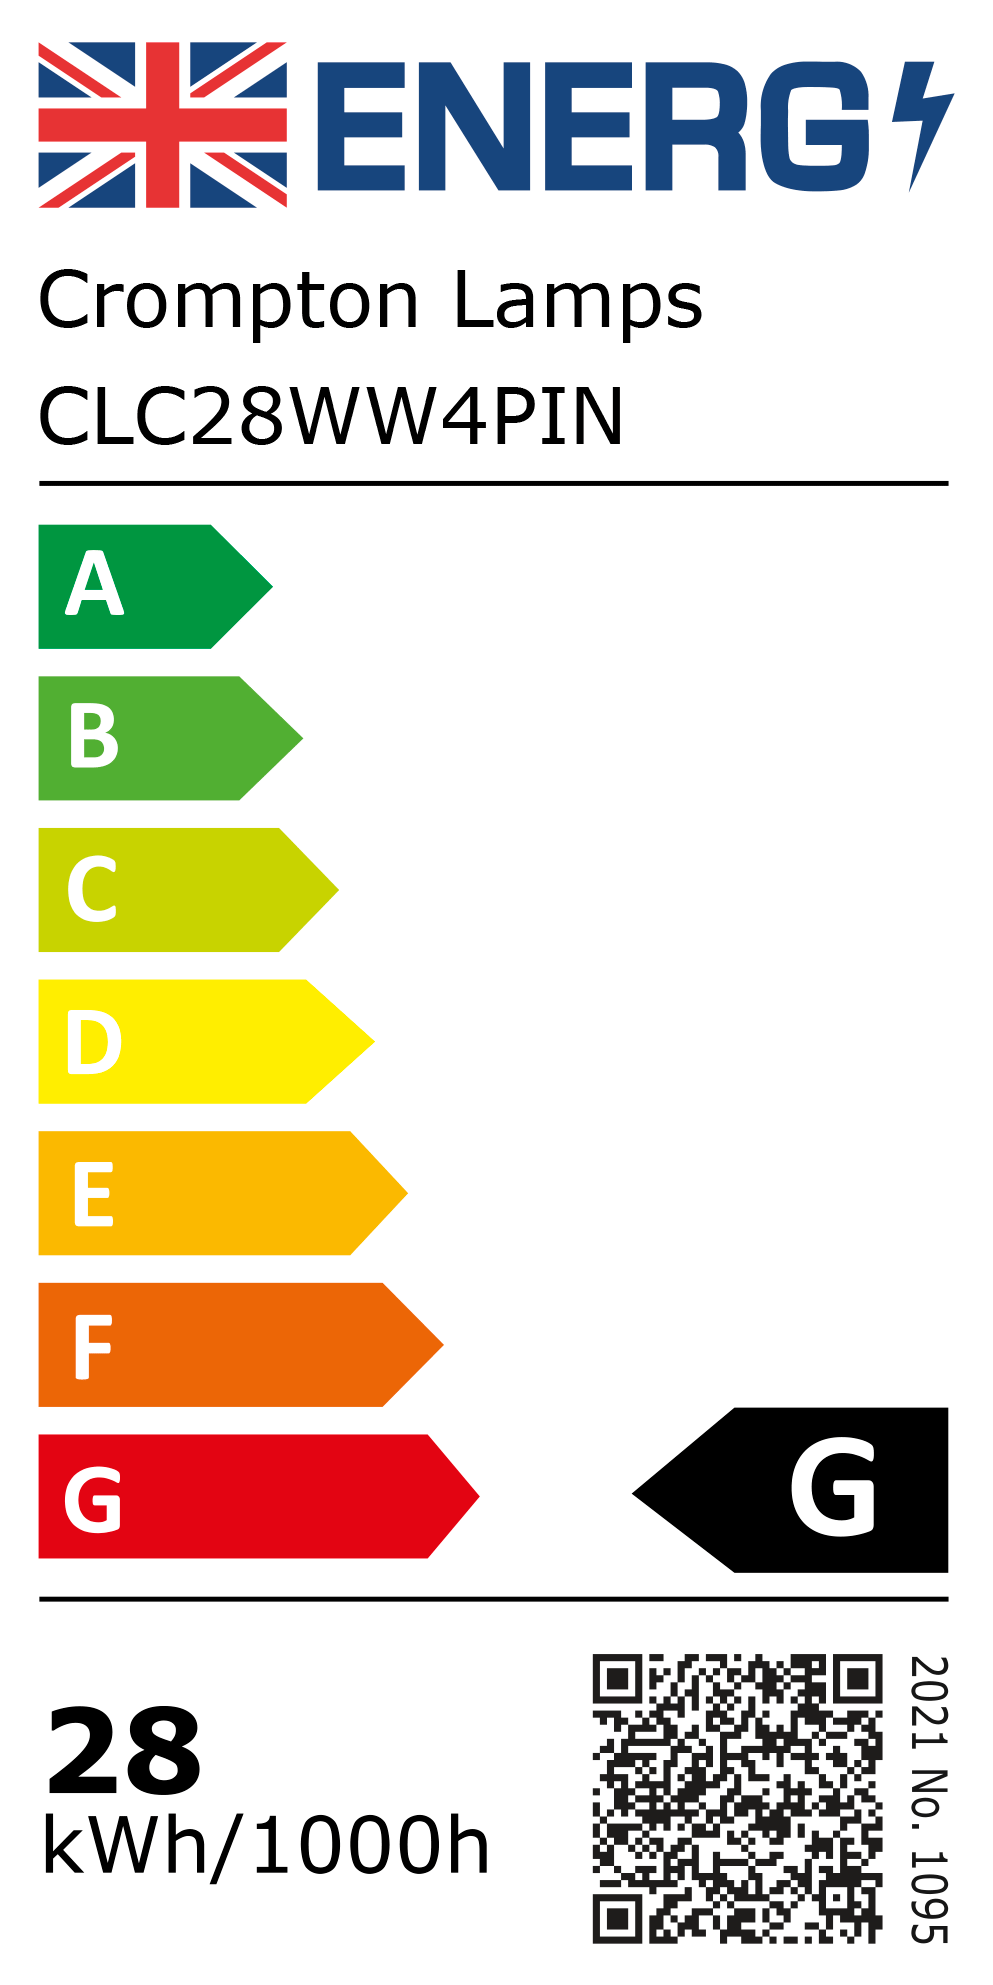 New 2021 Energy Rating Label: Stock Code CLC28WW4PIN